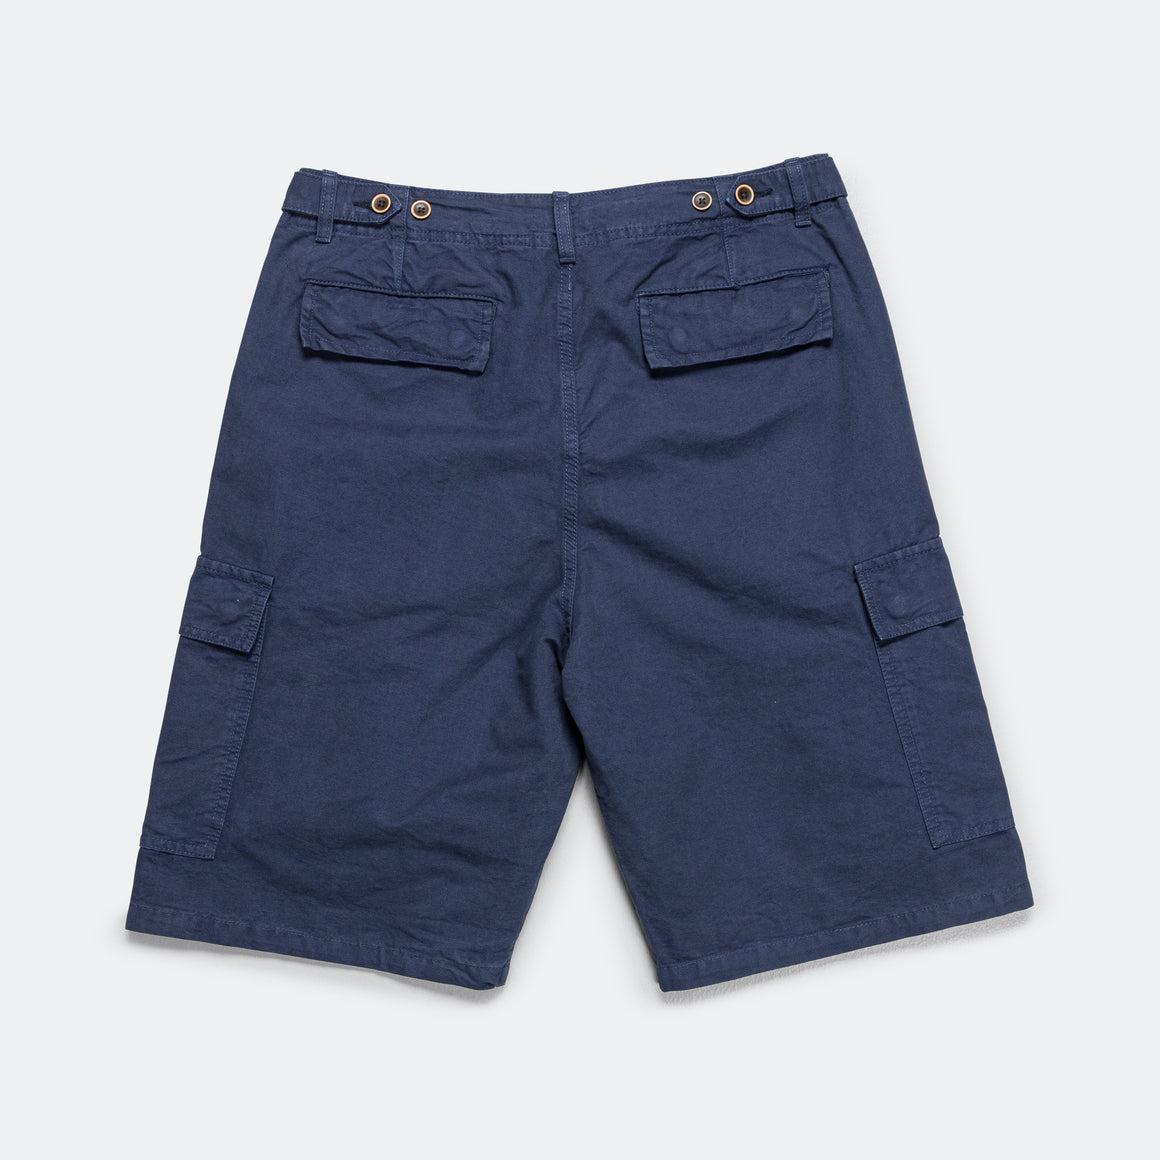 Armor Lux - Heritage Cargo Shorts - Marine Deep Navy - UP THERE